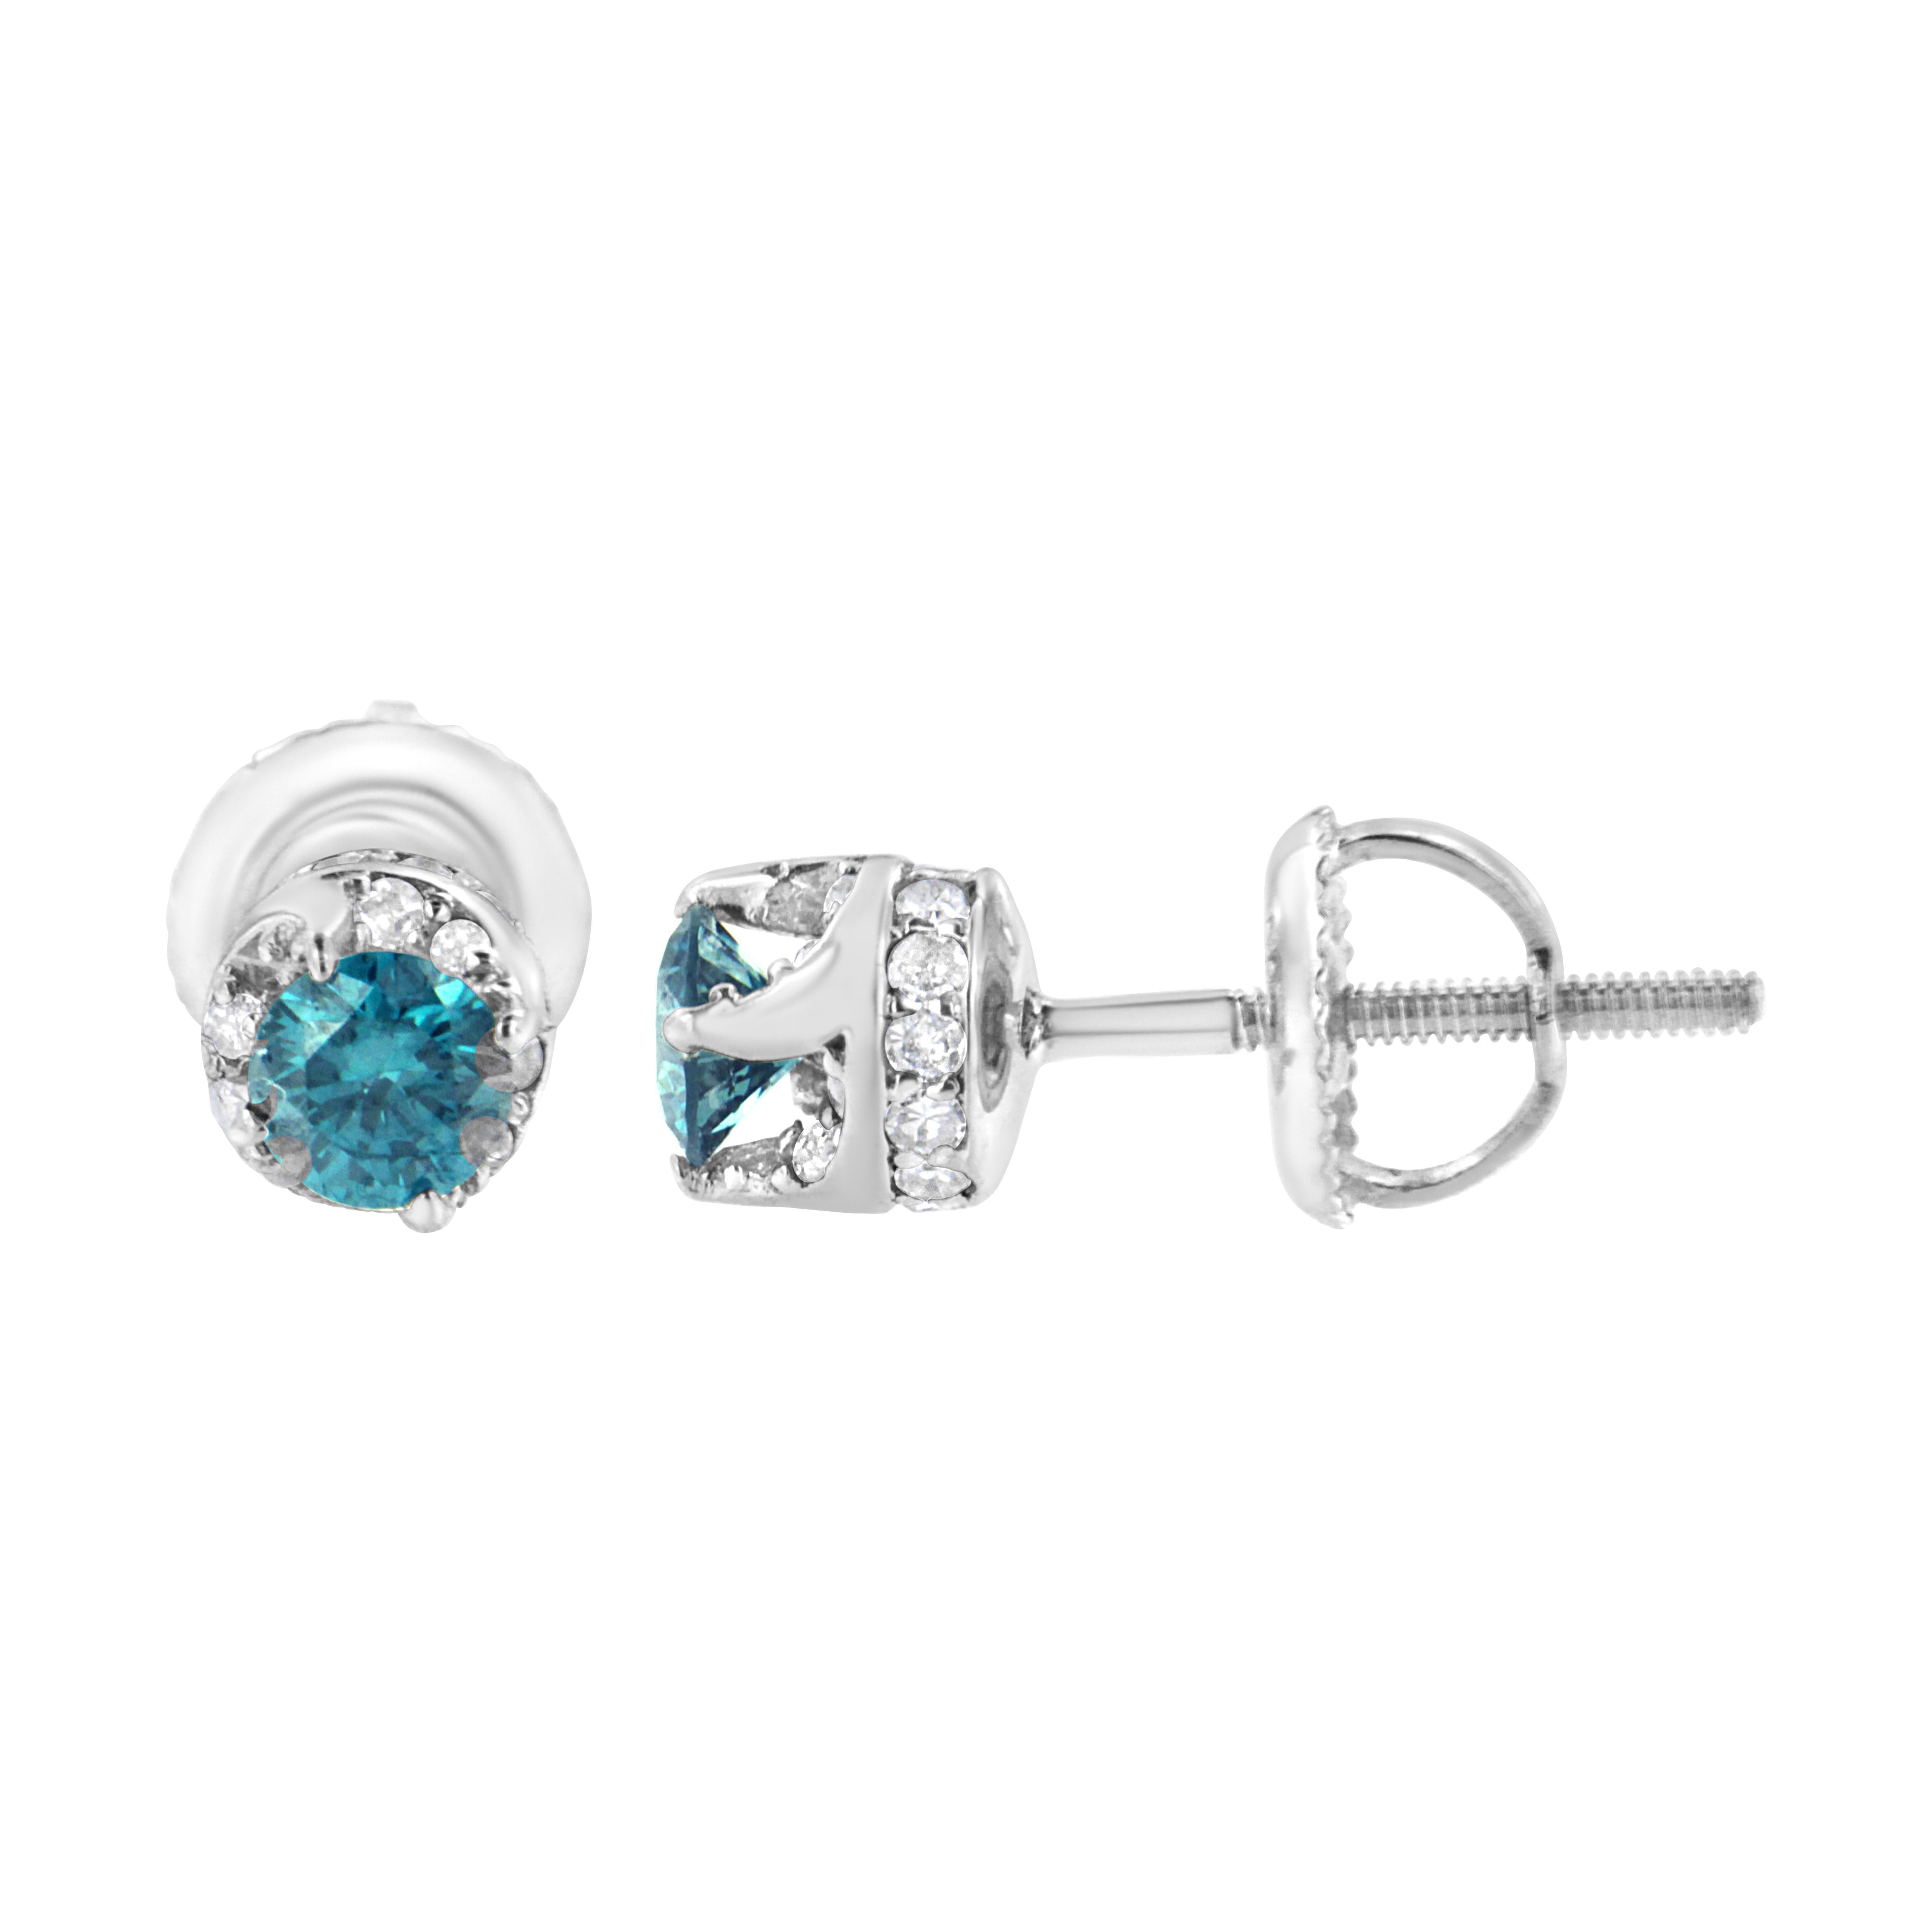 Illuminate your aura with an entrancing pair of diamond earrings, an extraordinary harmony of crisp white and deep blue hues. Exquisitely crafted from 14K white gold, these earrings are a testament to sophisticated elegance and modern design, meant